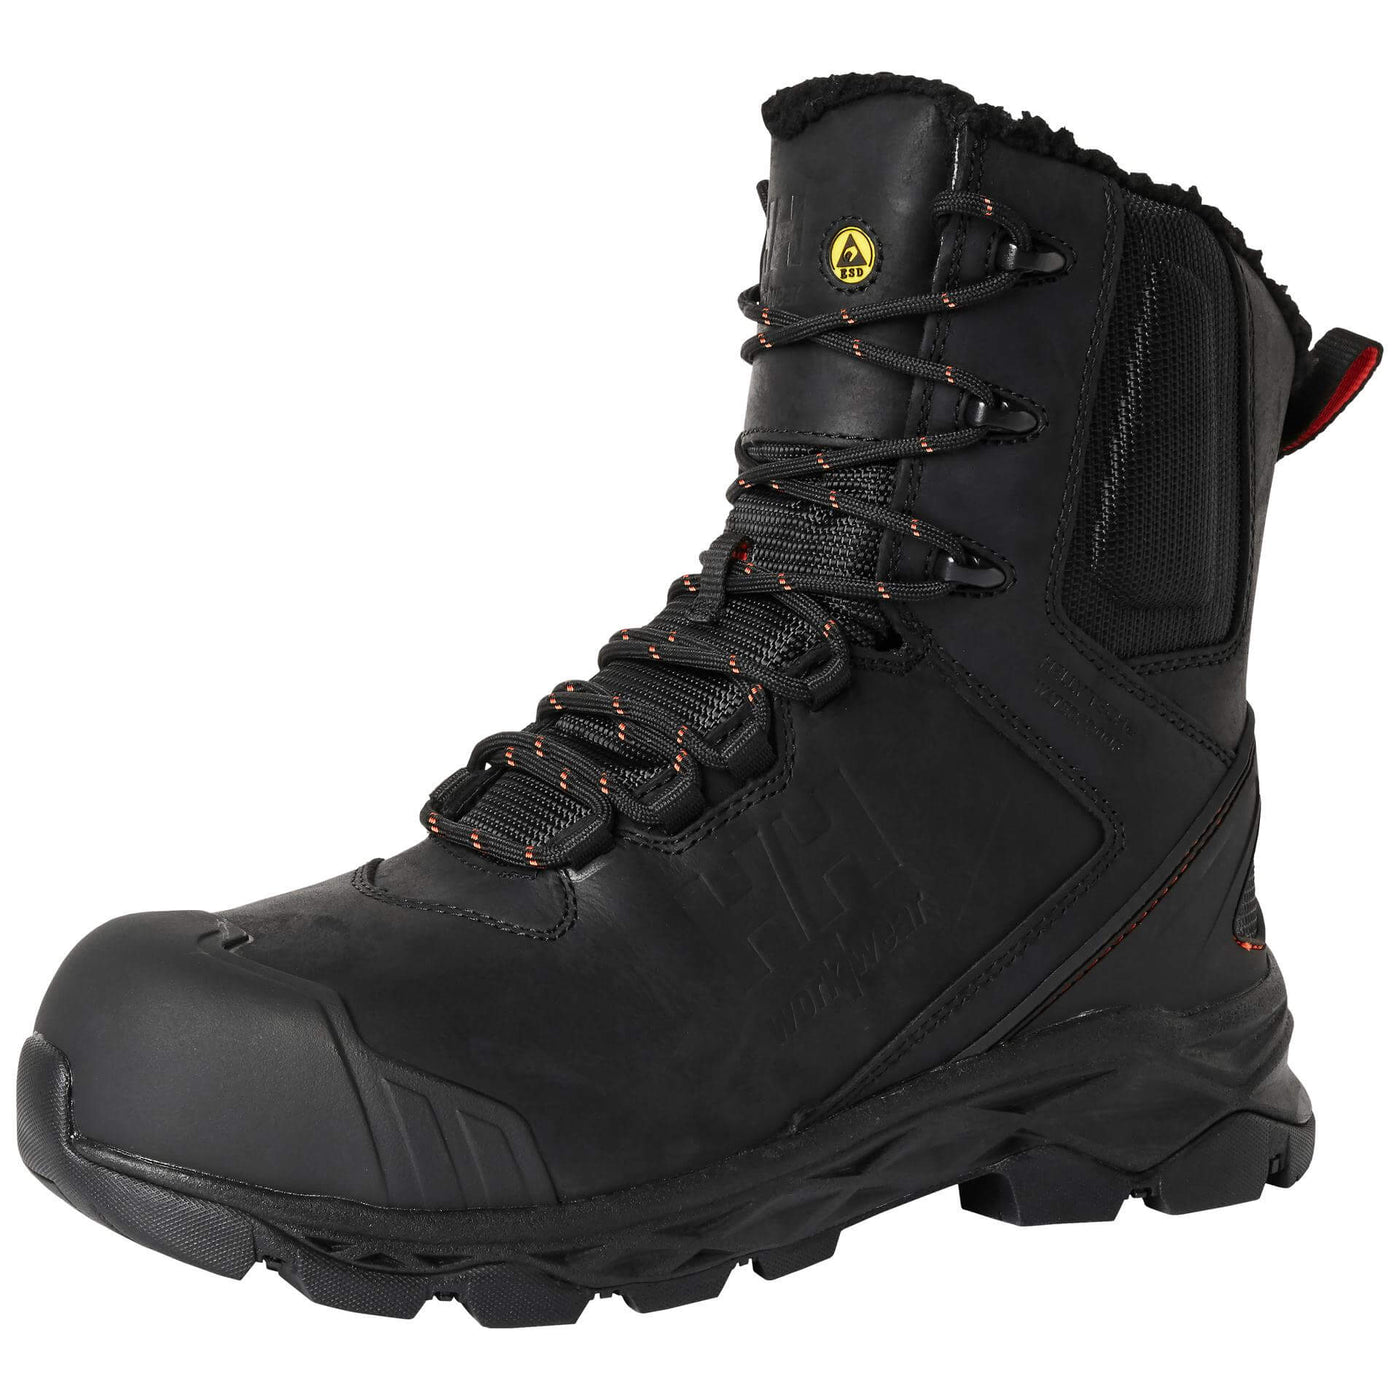 Helly Hansen Oxford Insulated Tall Composite Toe Cap Winter Safety Work Boots Black 3 Angle #colour_black